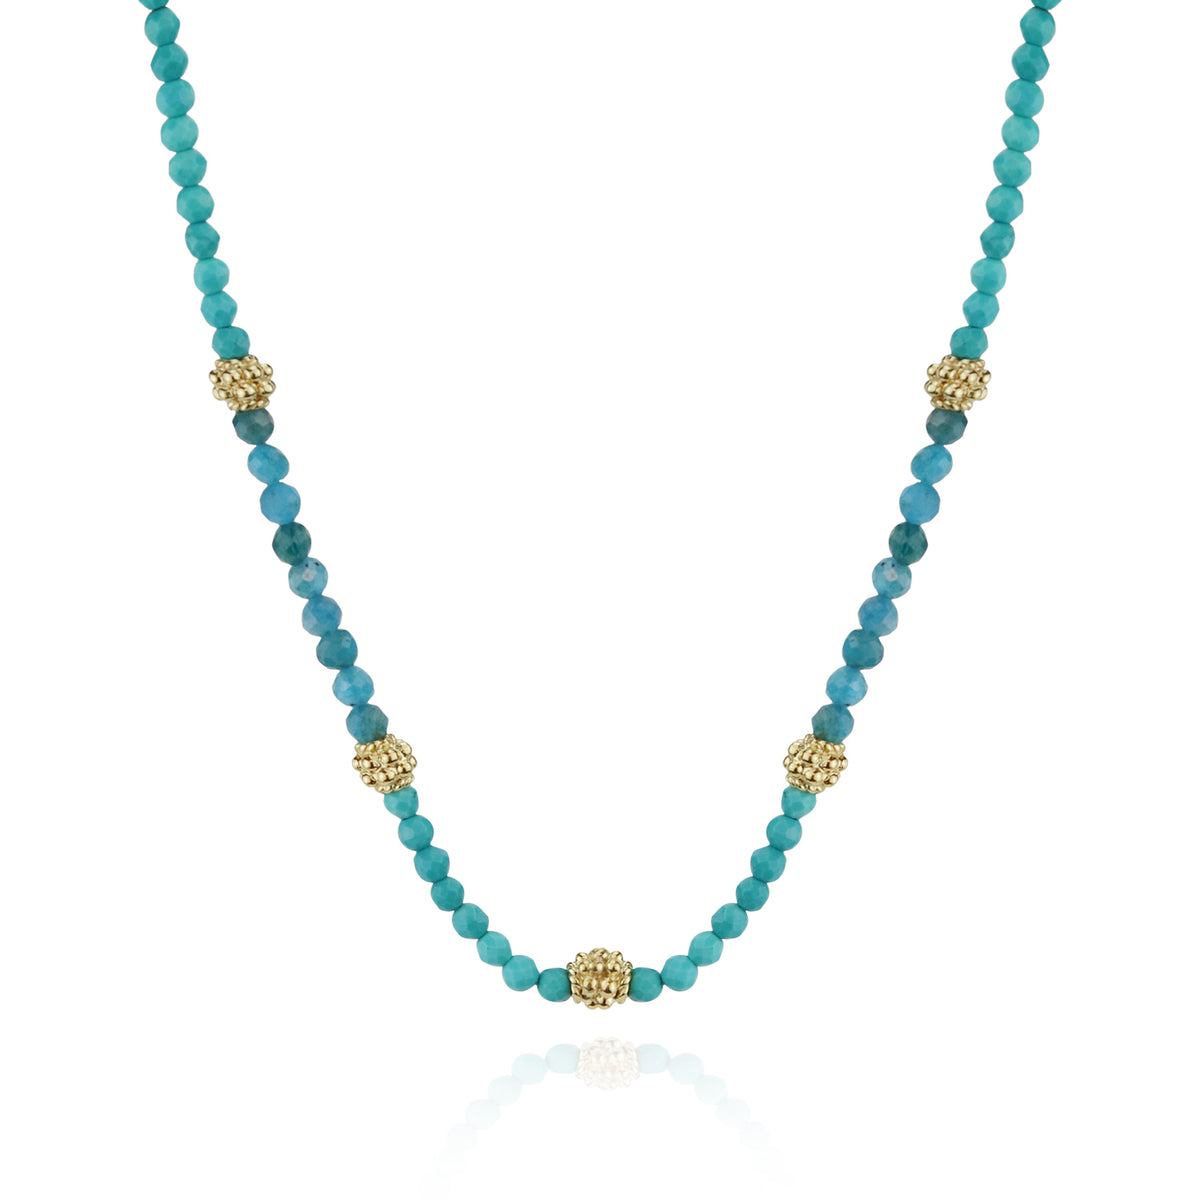 Turquoise & Apatite Beaded Necklace